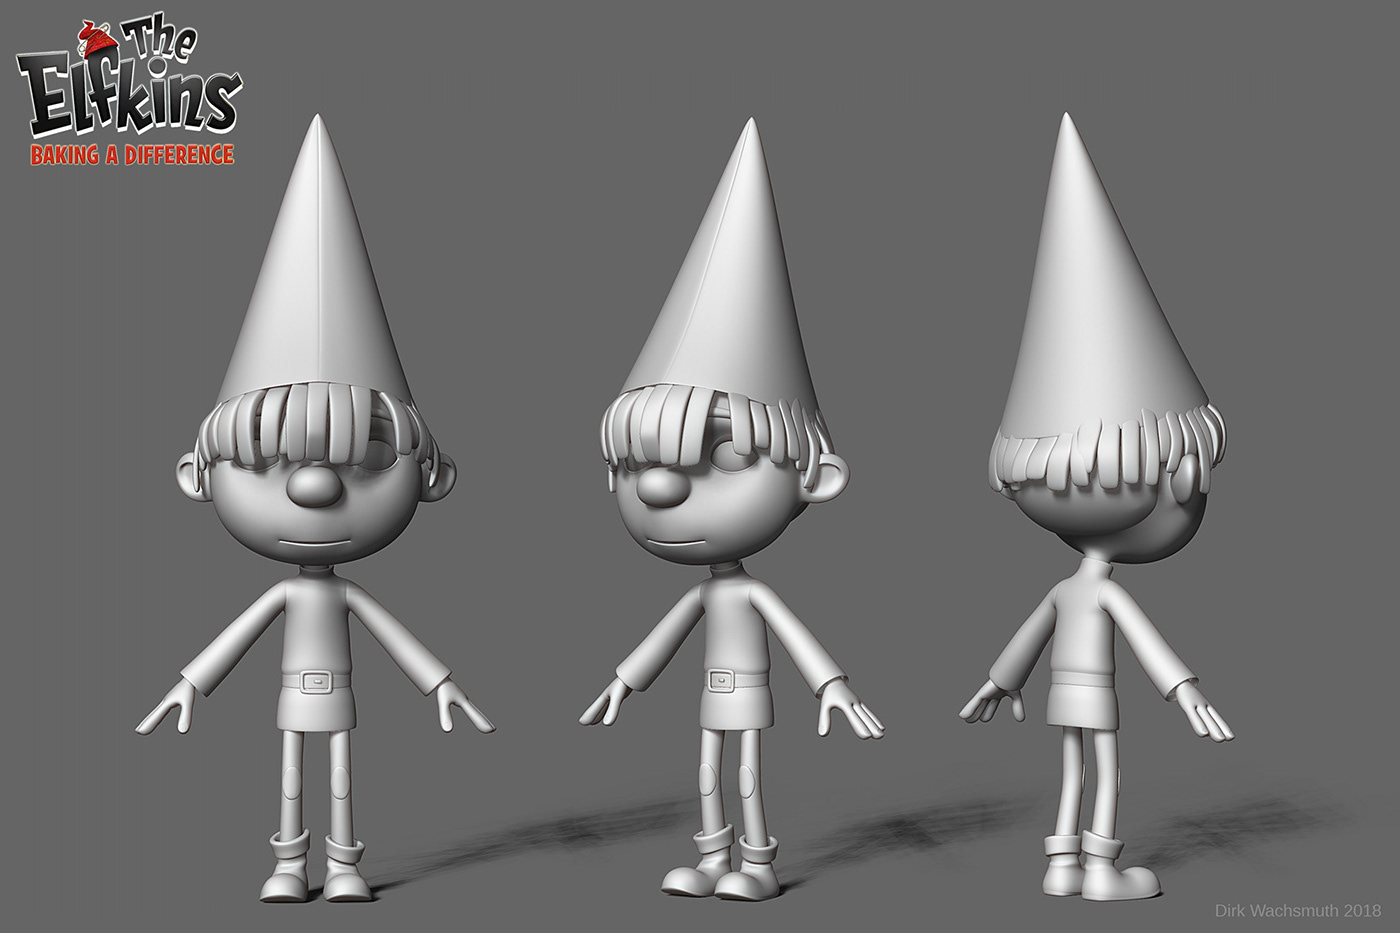 3DArtist 3dmodeling animated animation  Character Charactermodeling Film   modeling stylized toon